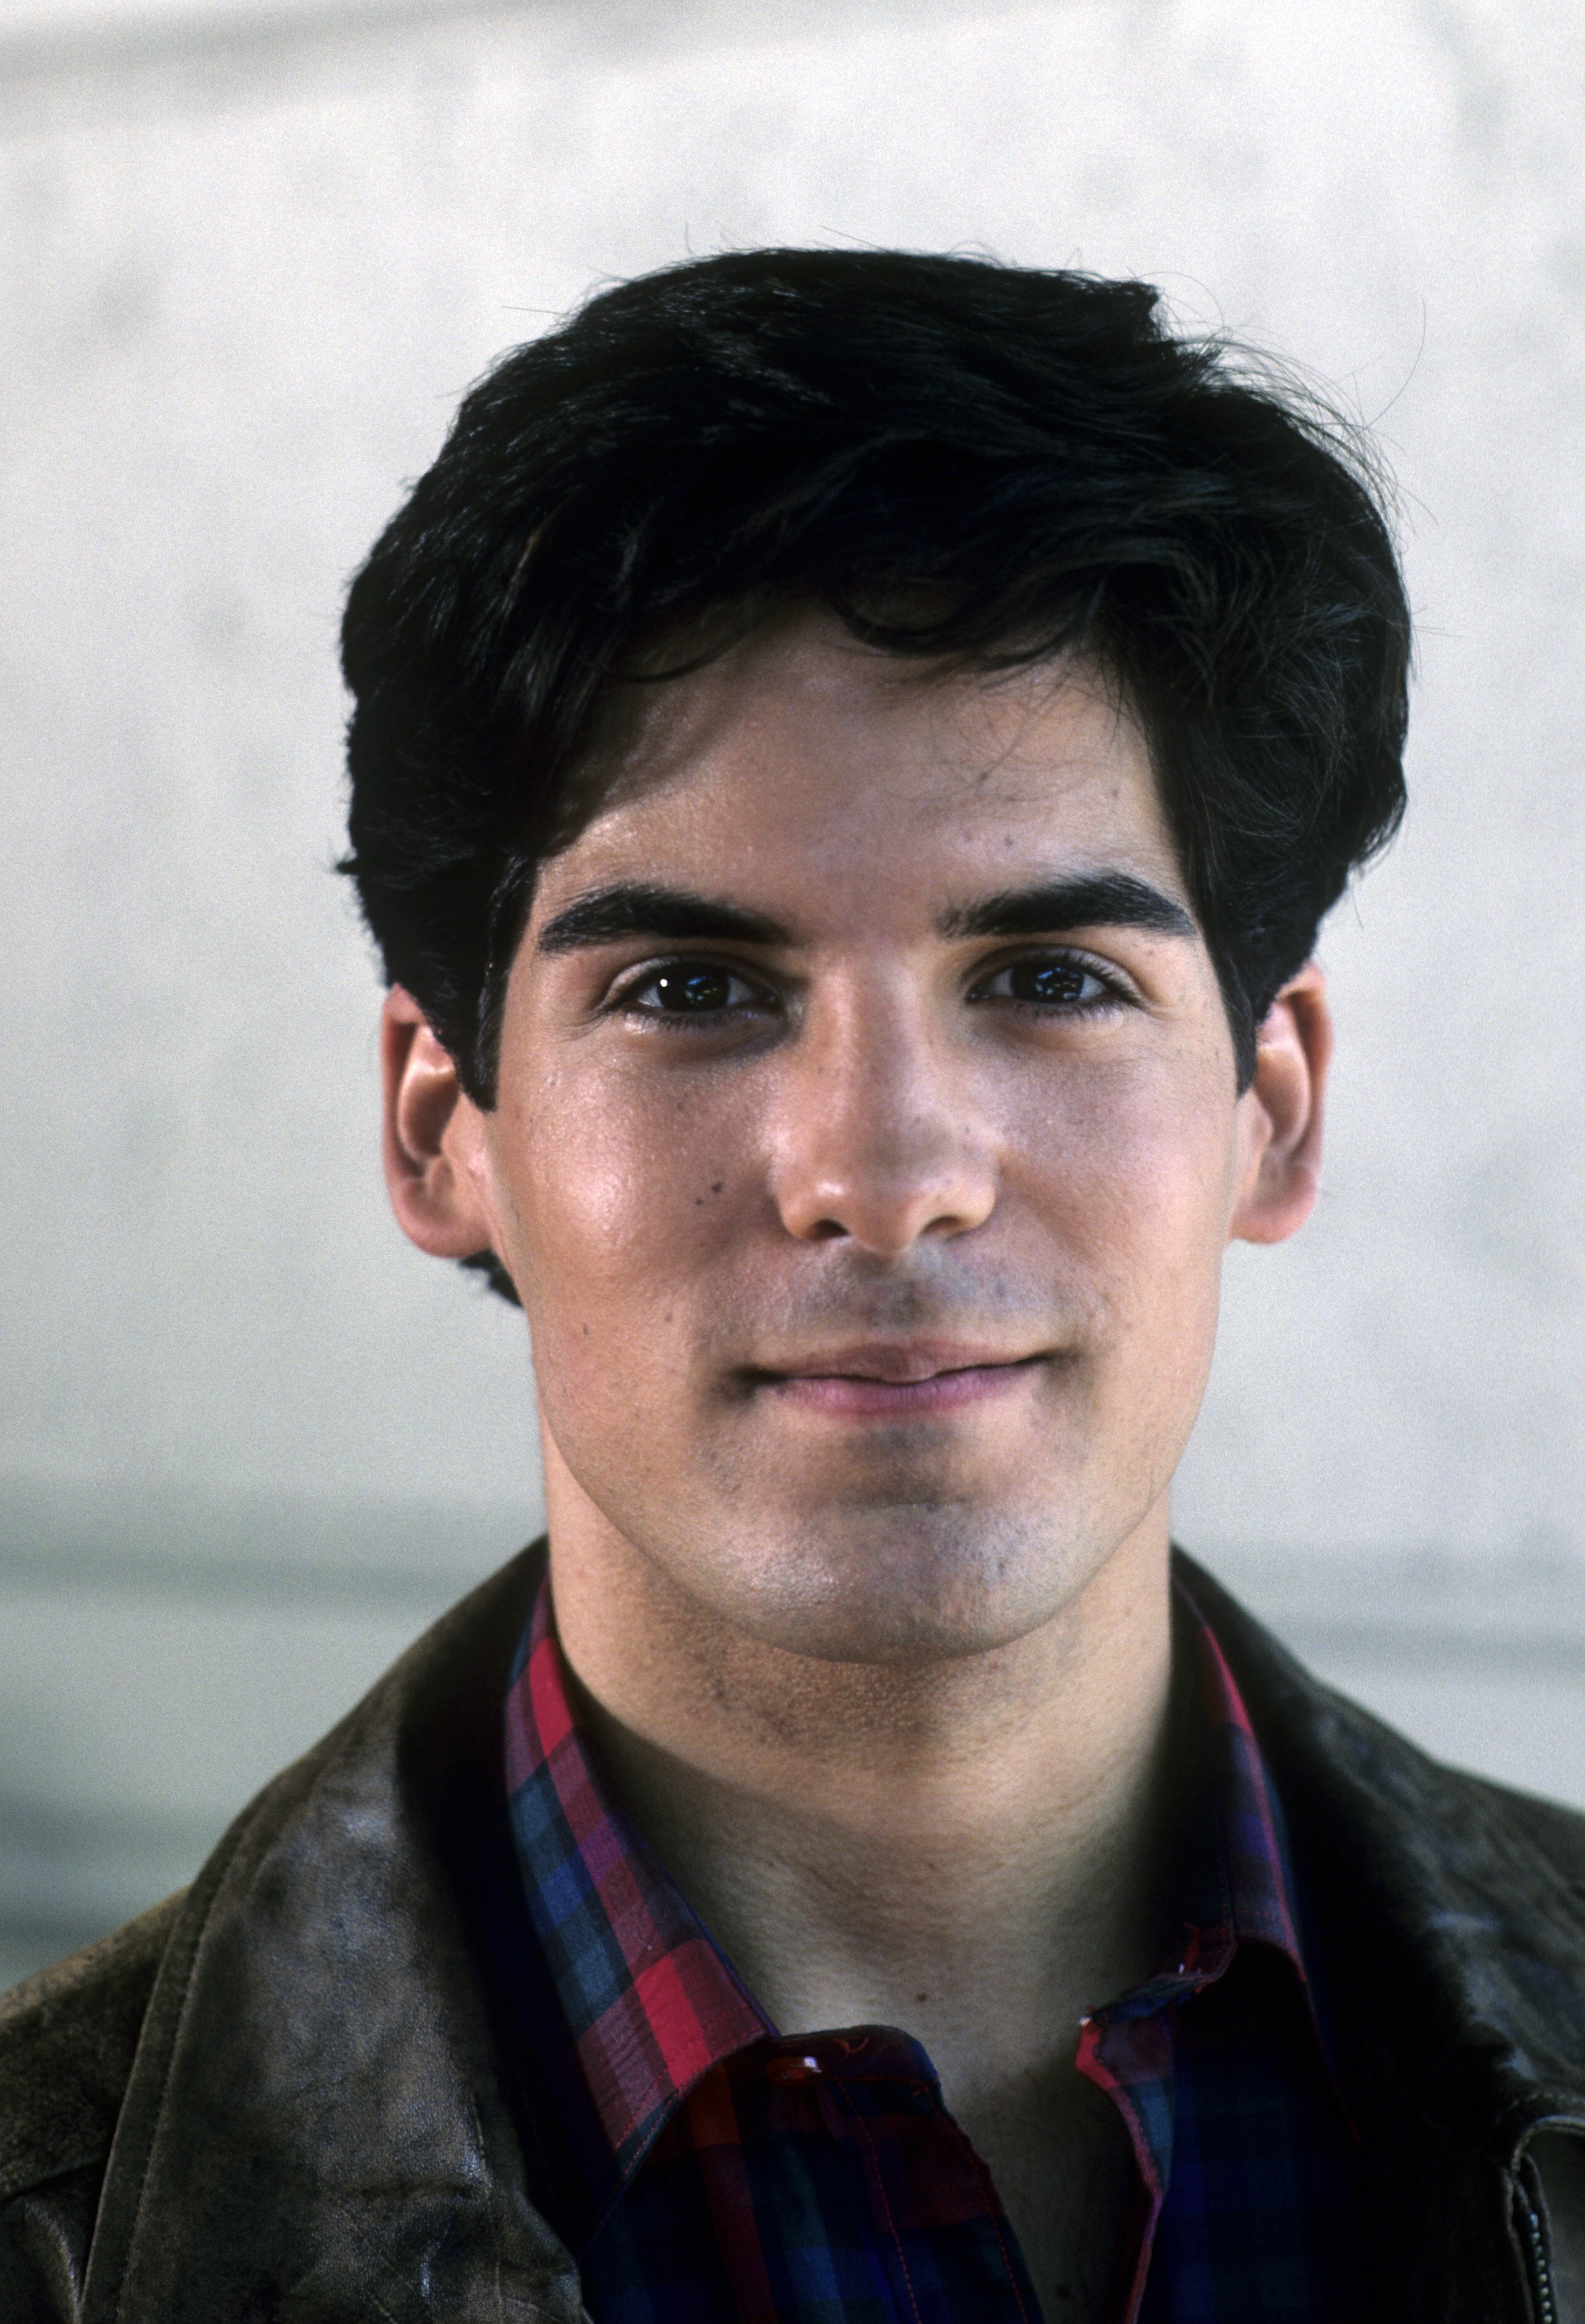 Photo of Matthew Labyorteaux for the series "Hotel," on January 2, 1988 | Source: Getty Images